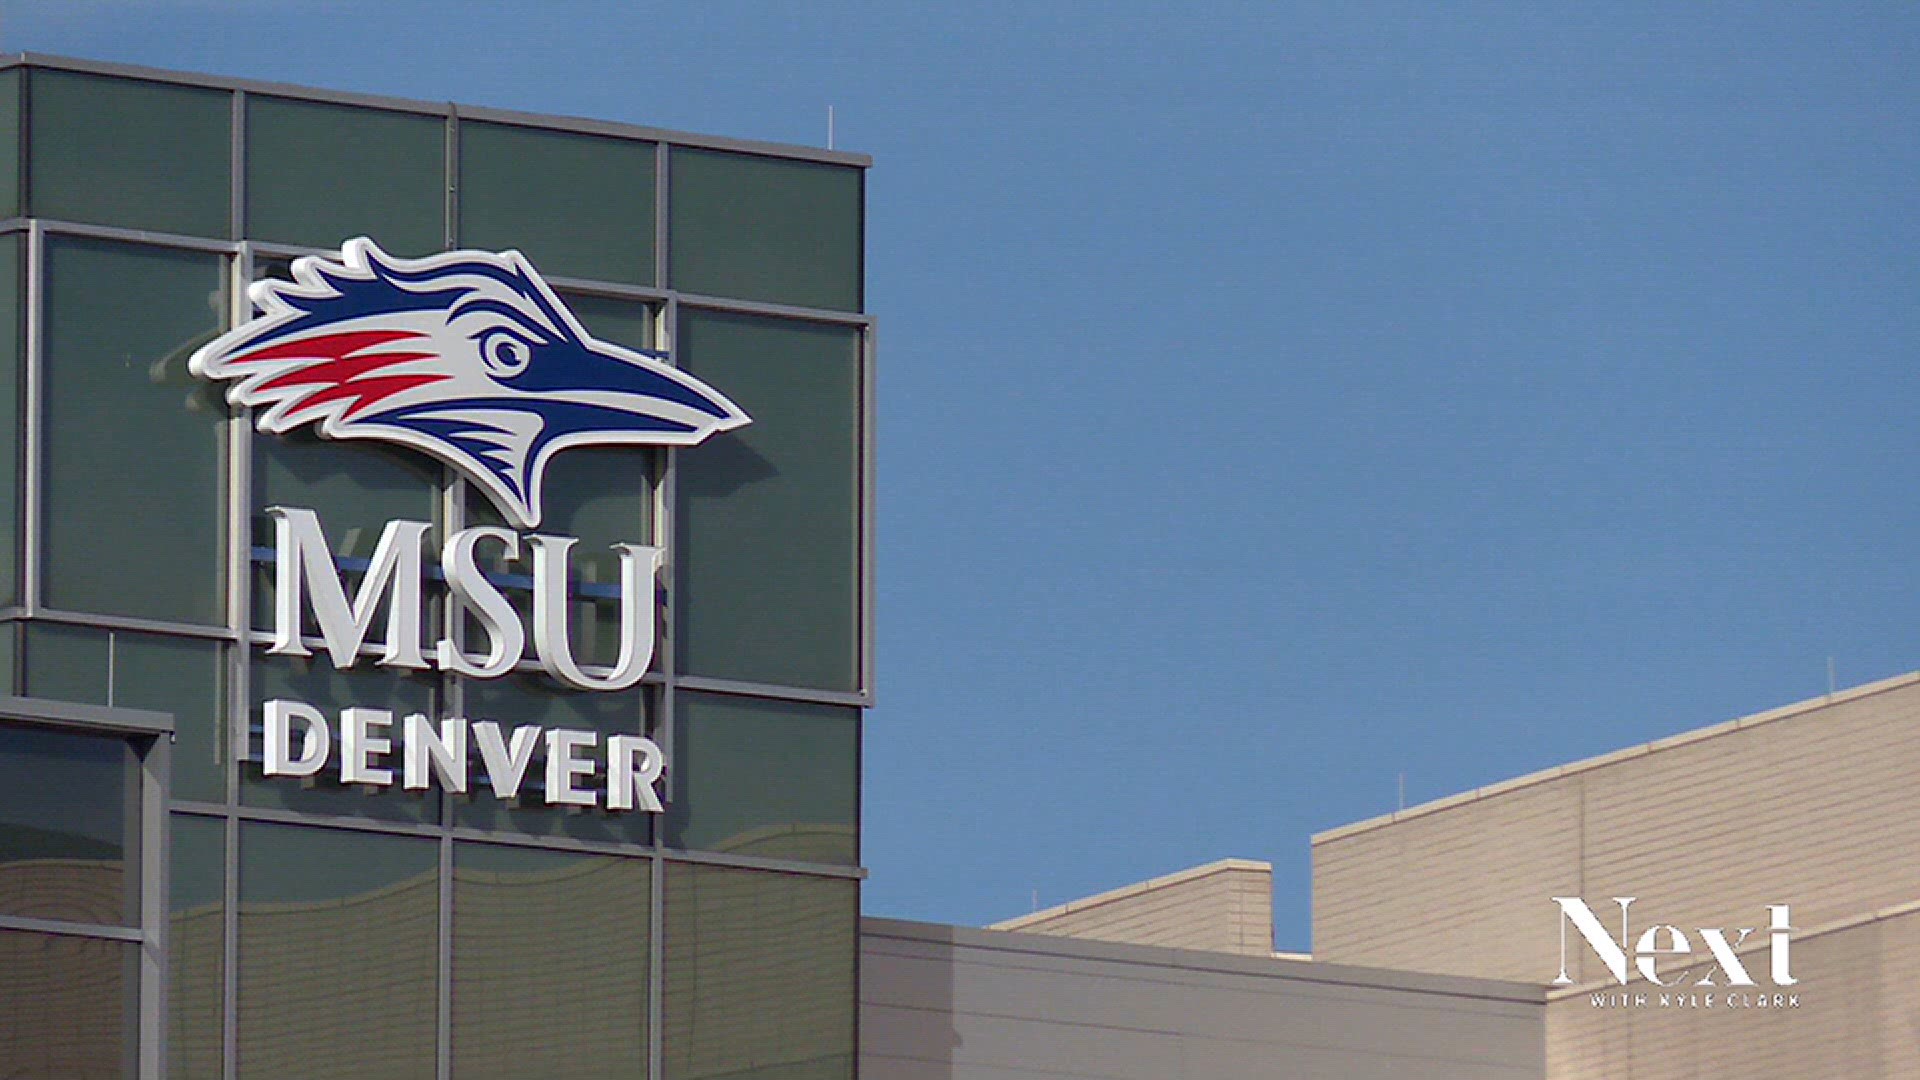 MSU Denver recently told thousands of students who didn't graduate that earning a degree is still possible -- even without having to go back to school.